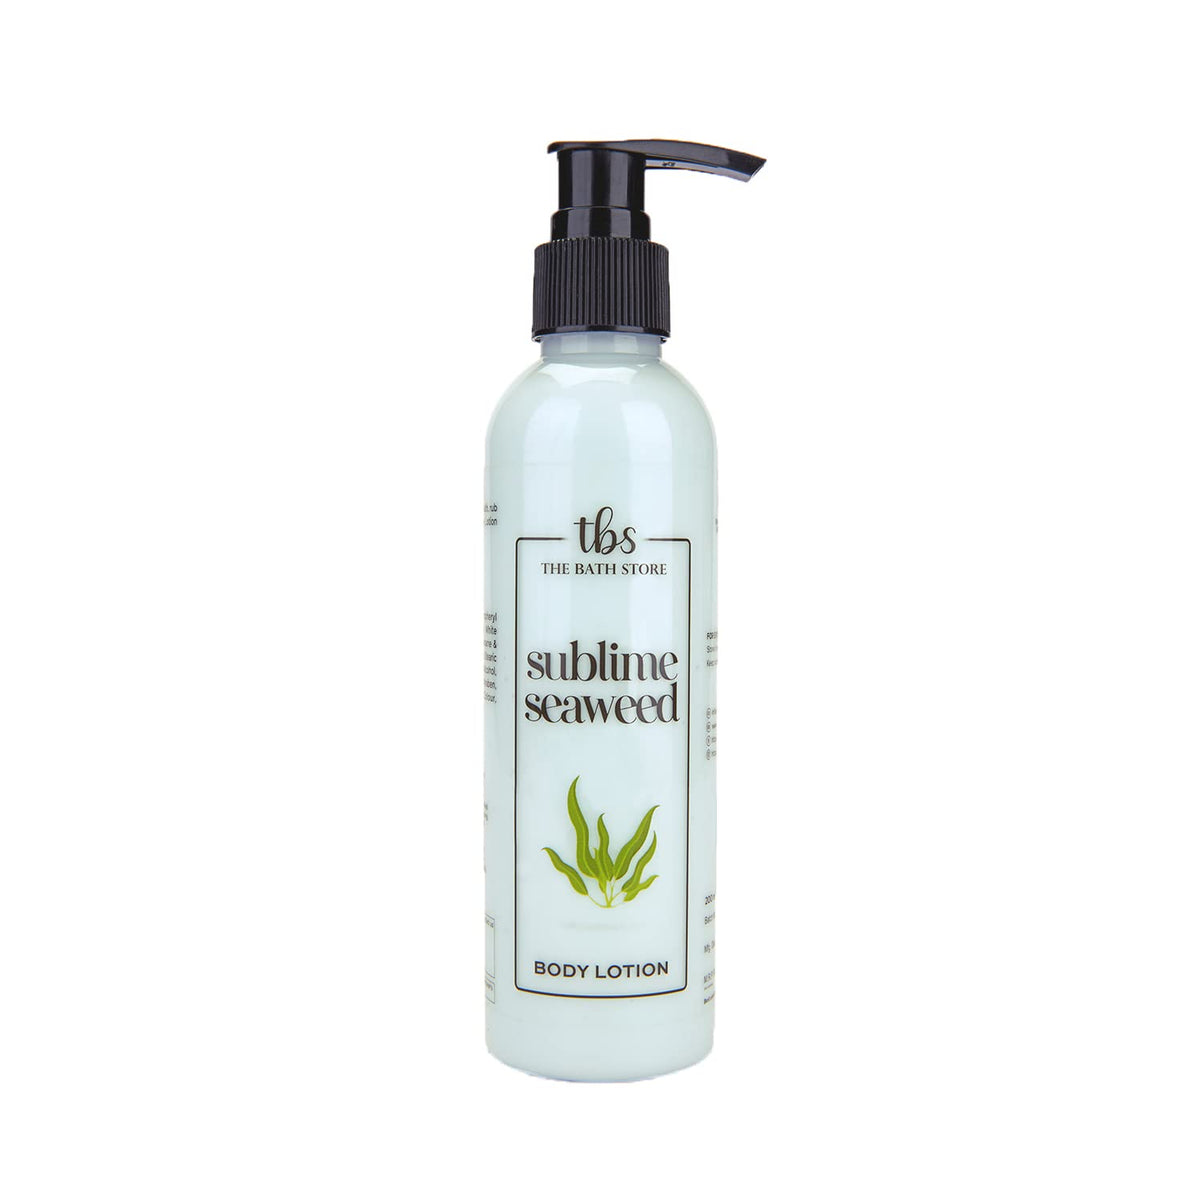 The Bath Store Sublime Seaweed Body Lotion for Deep Moisturizing, for All Skin Type - 190ml